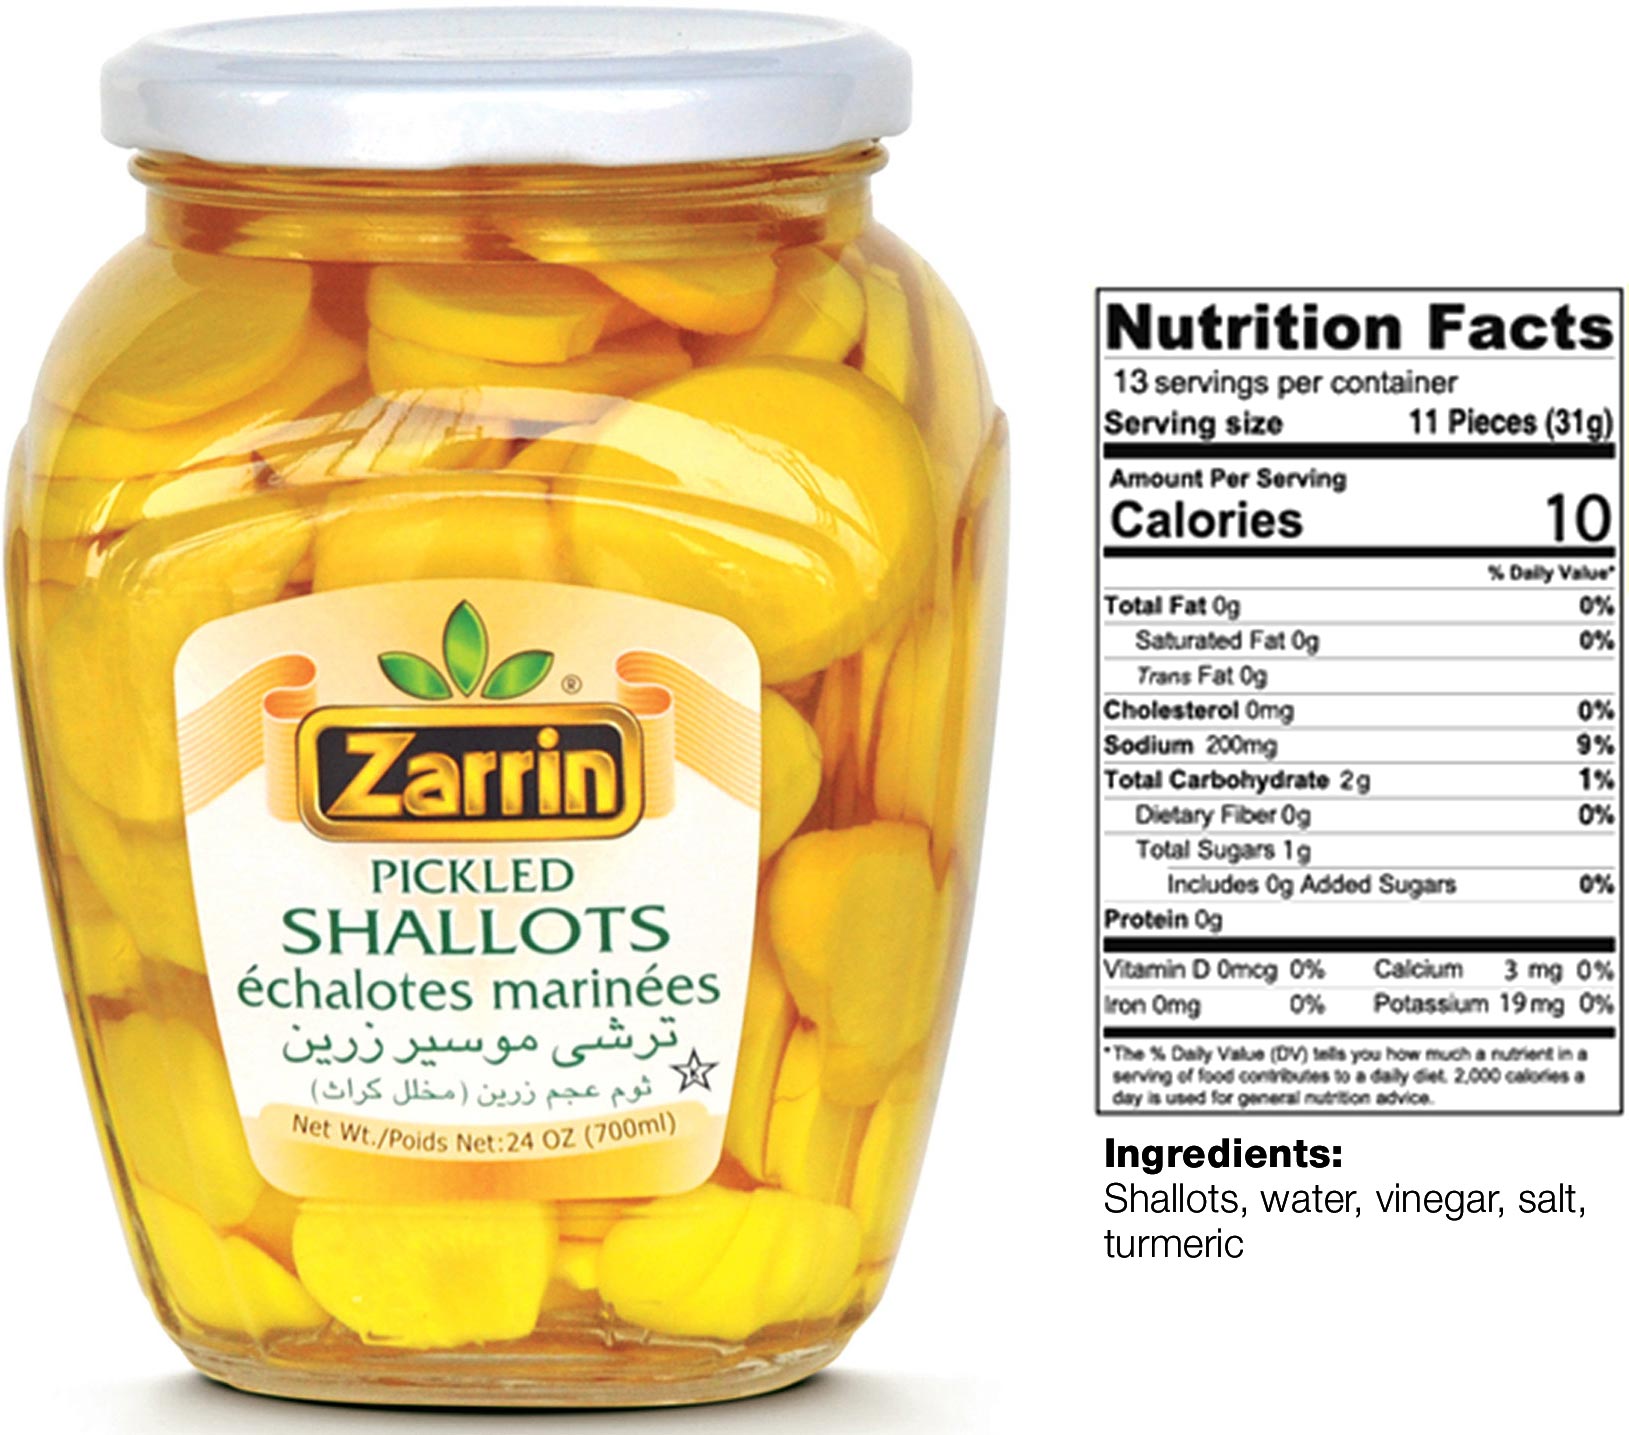 Pickled shallot in glass jar by Zarrin with net weight 24 oz.